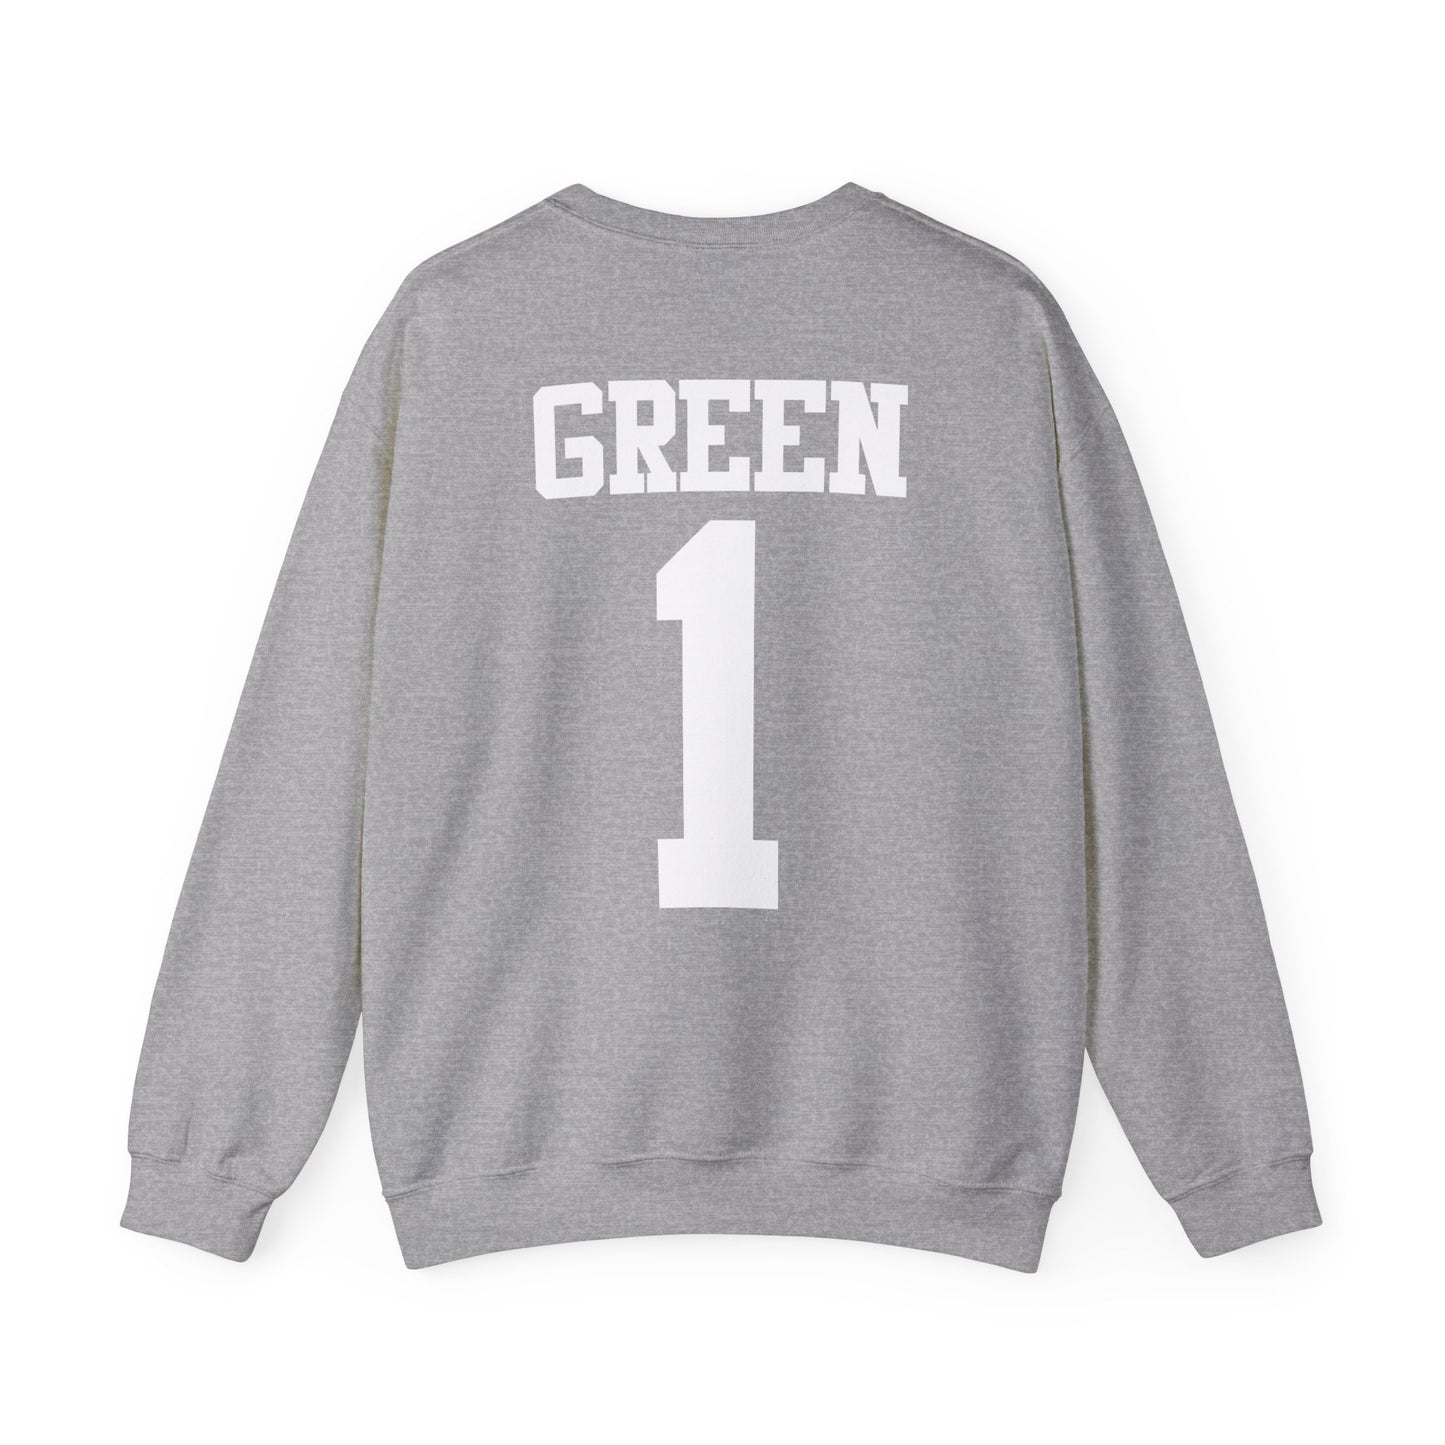 Myla Green: GameDay With Name & Number Crewneck